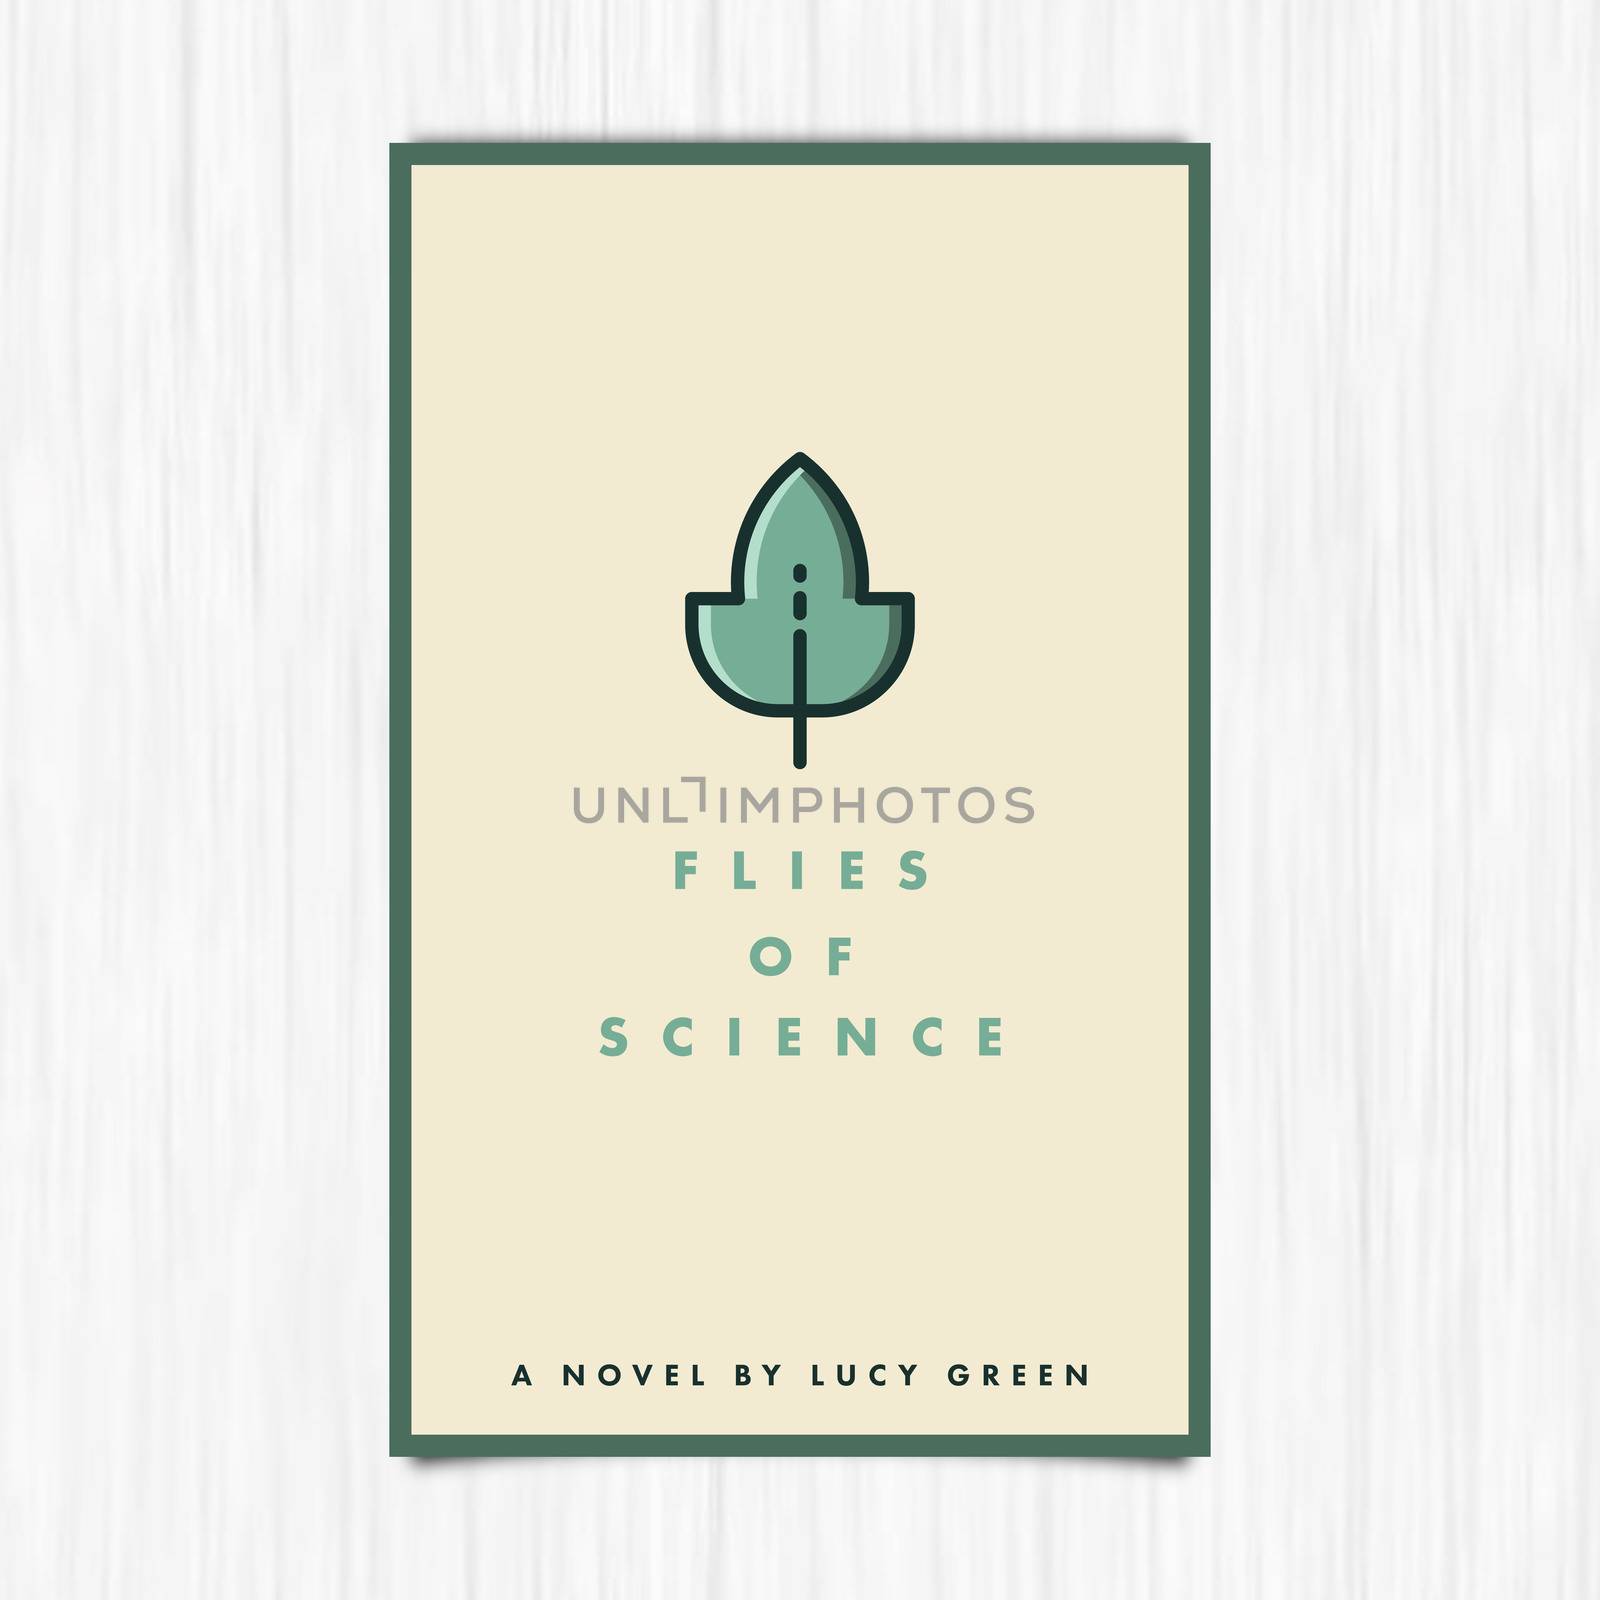 Vector of novel cover with flies of science text against white background